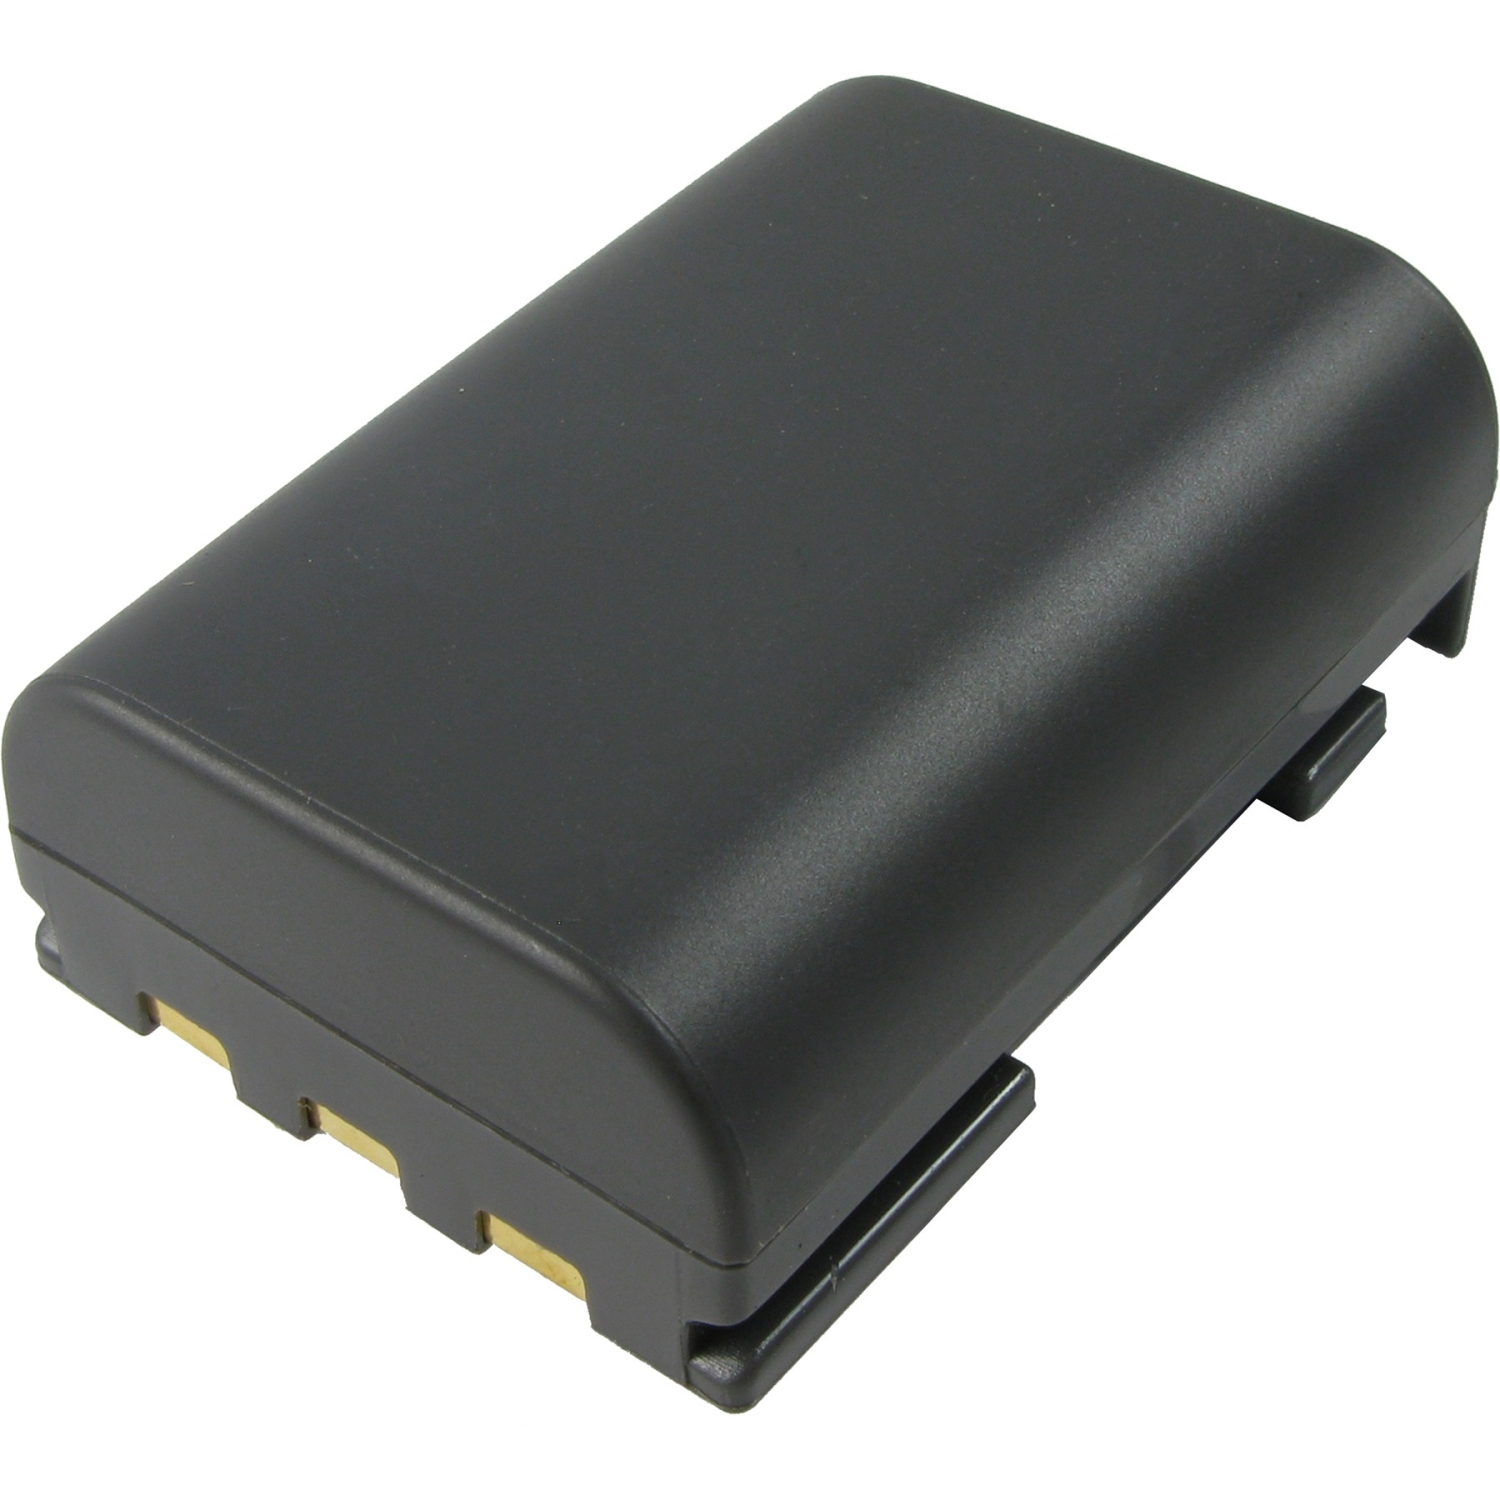 Lenmar Replacement Rechargeable Battery for Canon NB-2L, NB-2LH, NB-2JH, BP-2LH, BP-2L12, BP-2L13, BP-2L14, BP-2L15, BP-2626R - image 2 of 2